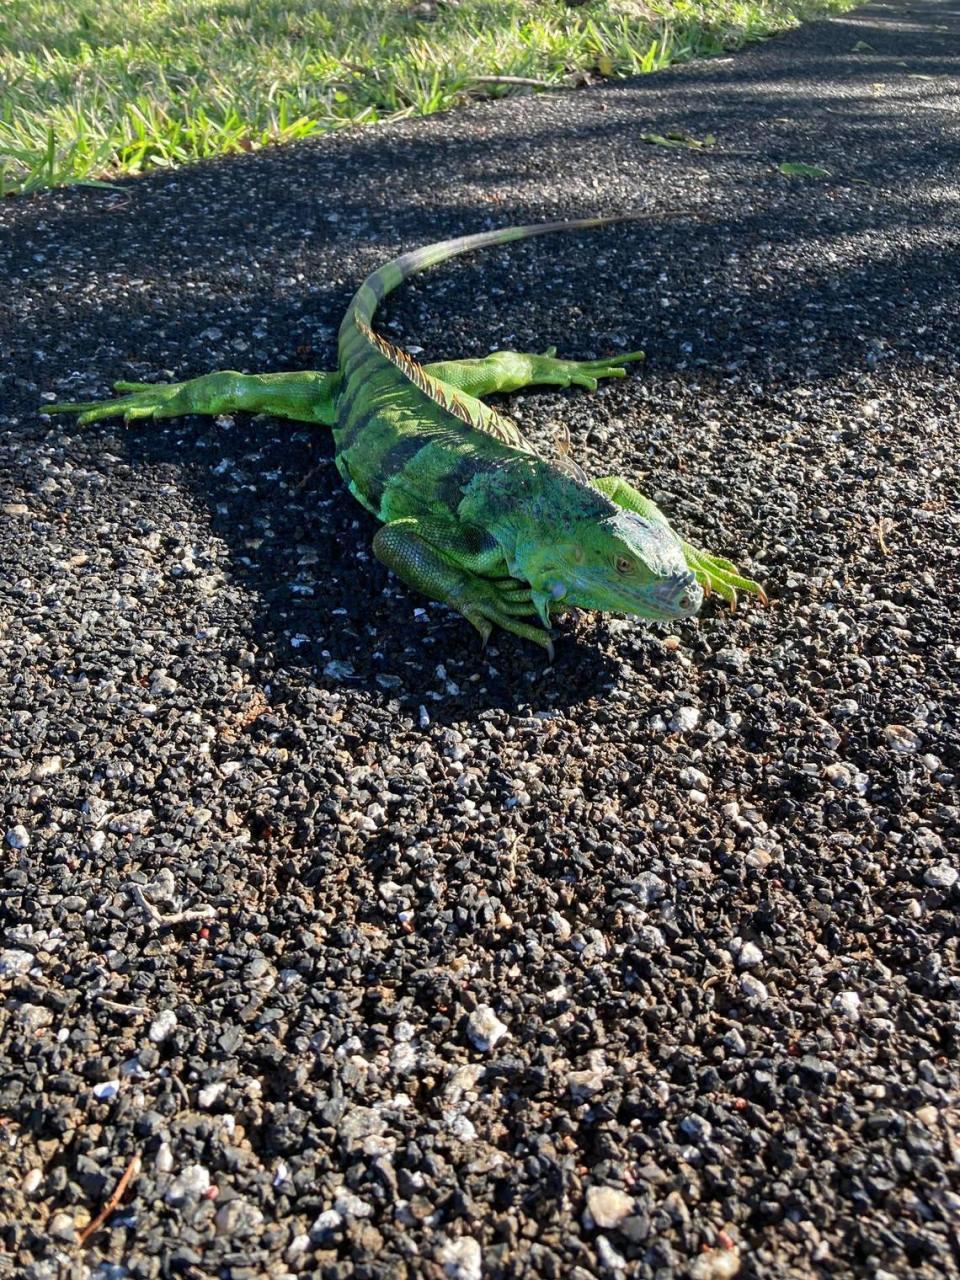 Diana Rush, a music teacher at the Frost School of Music at the University of Miami, found a cold-stunned iguana while on a run Wednesday morning on Shotgun Road in Broward.